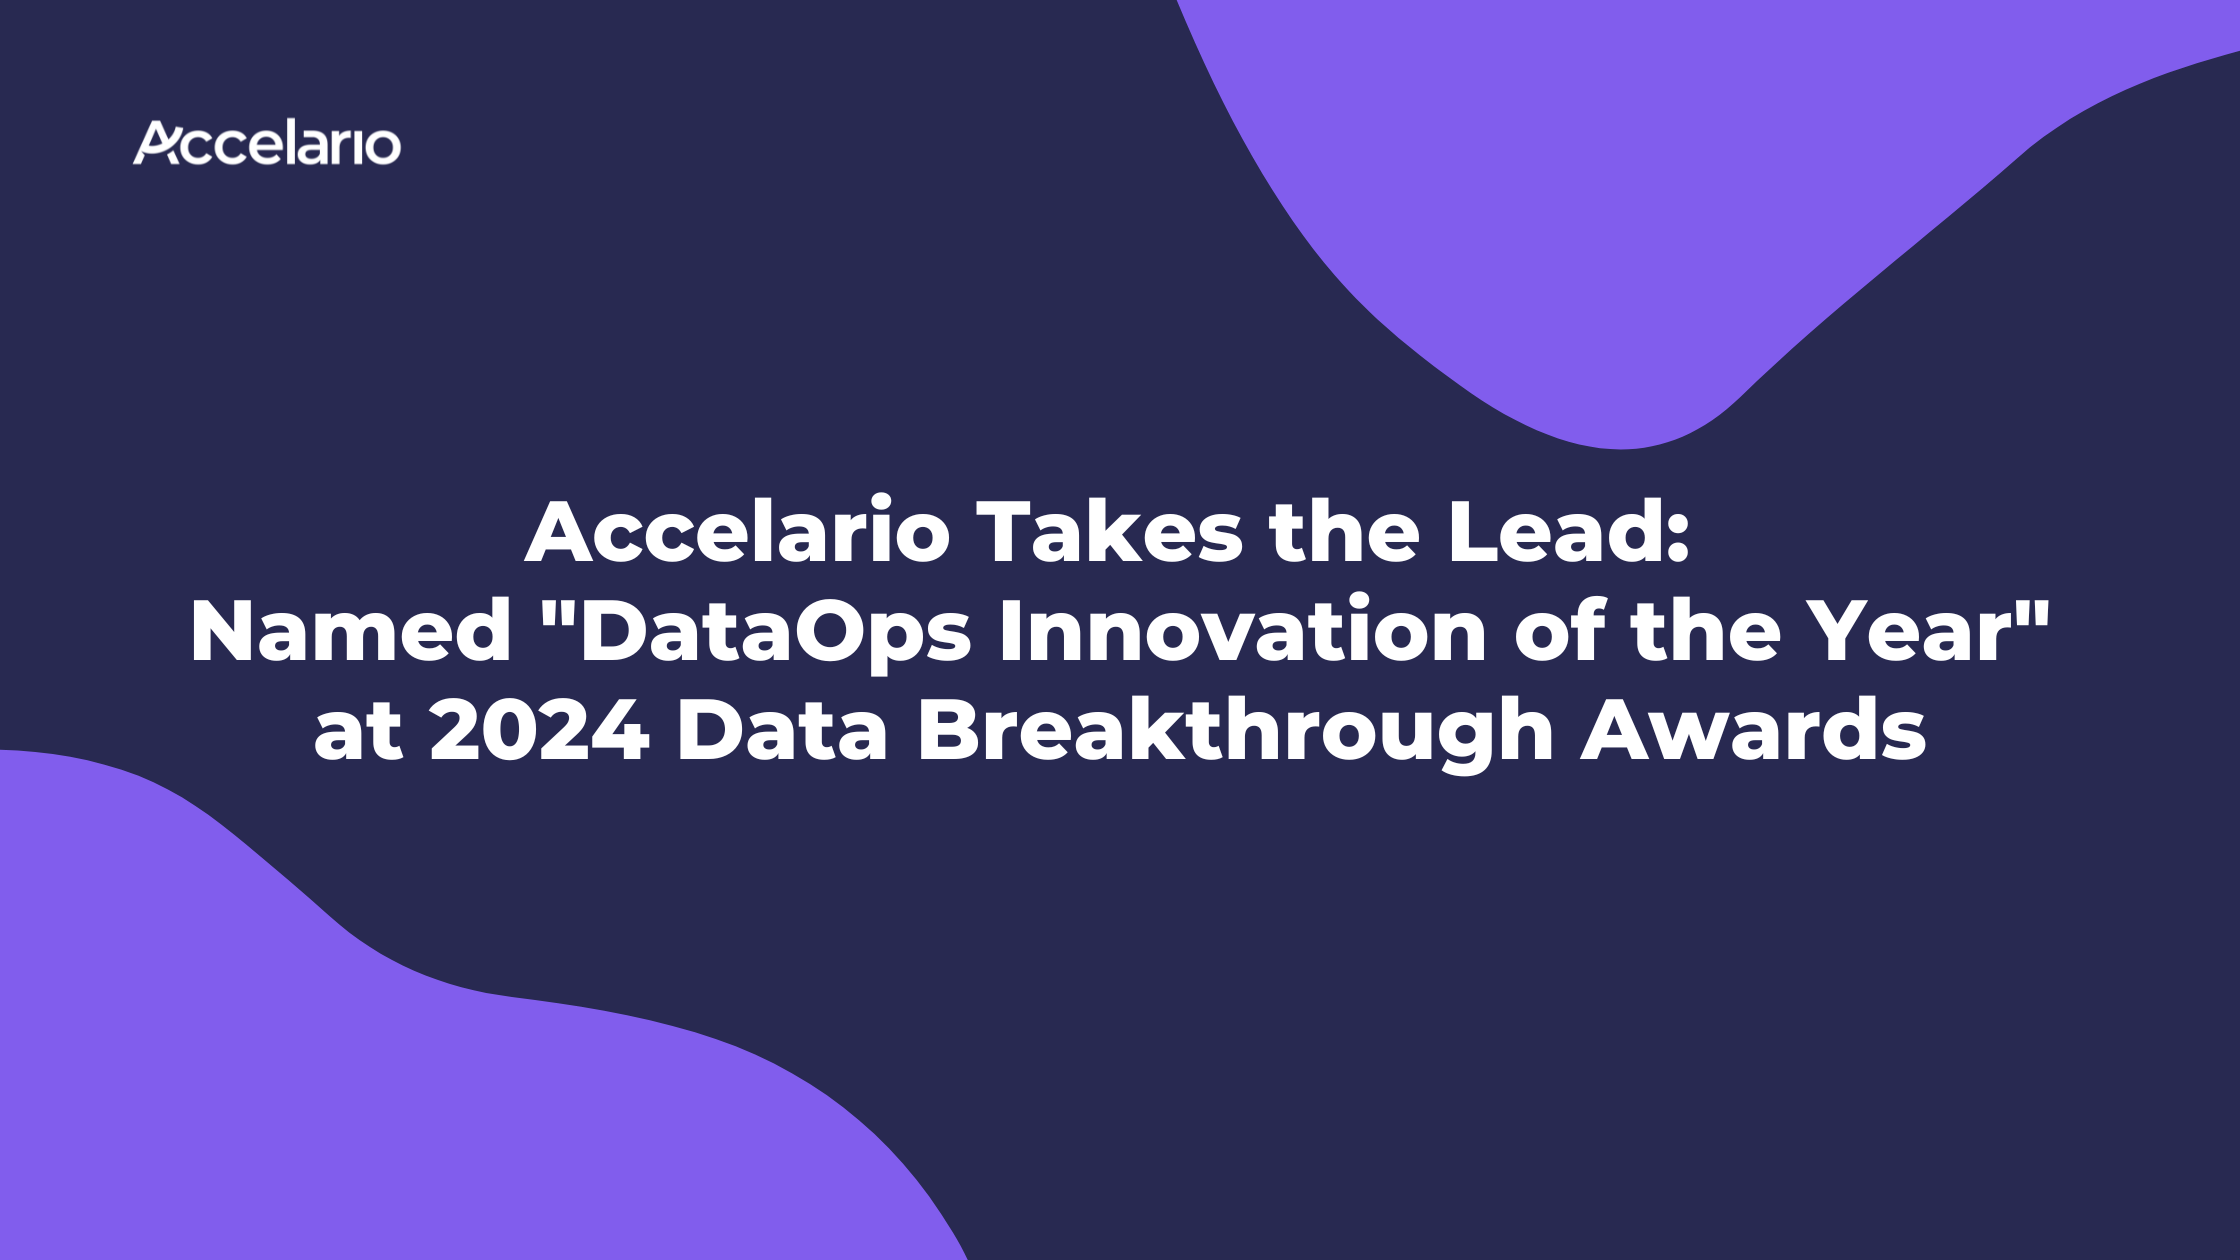 Accelario Takes the Lead: Named “DataOps Innovation of the Year” at 2024 Data Breakthrough Awards